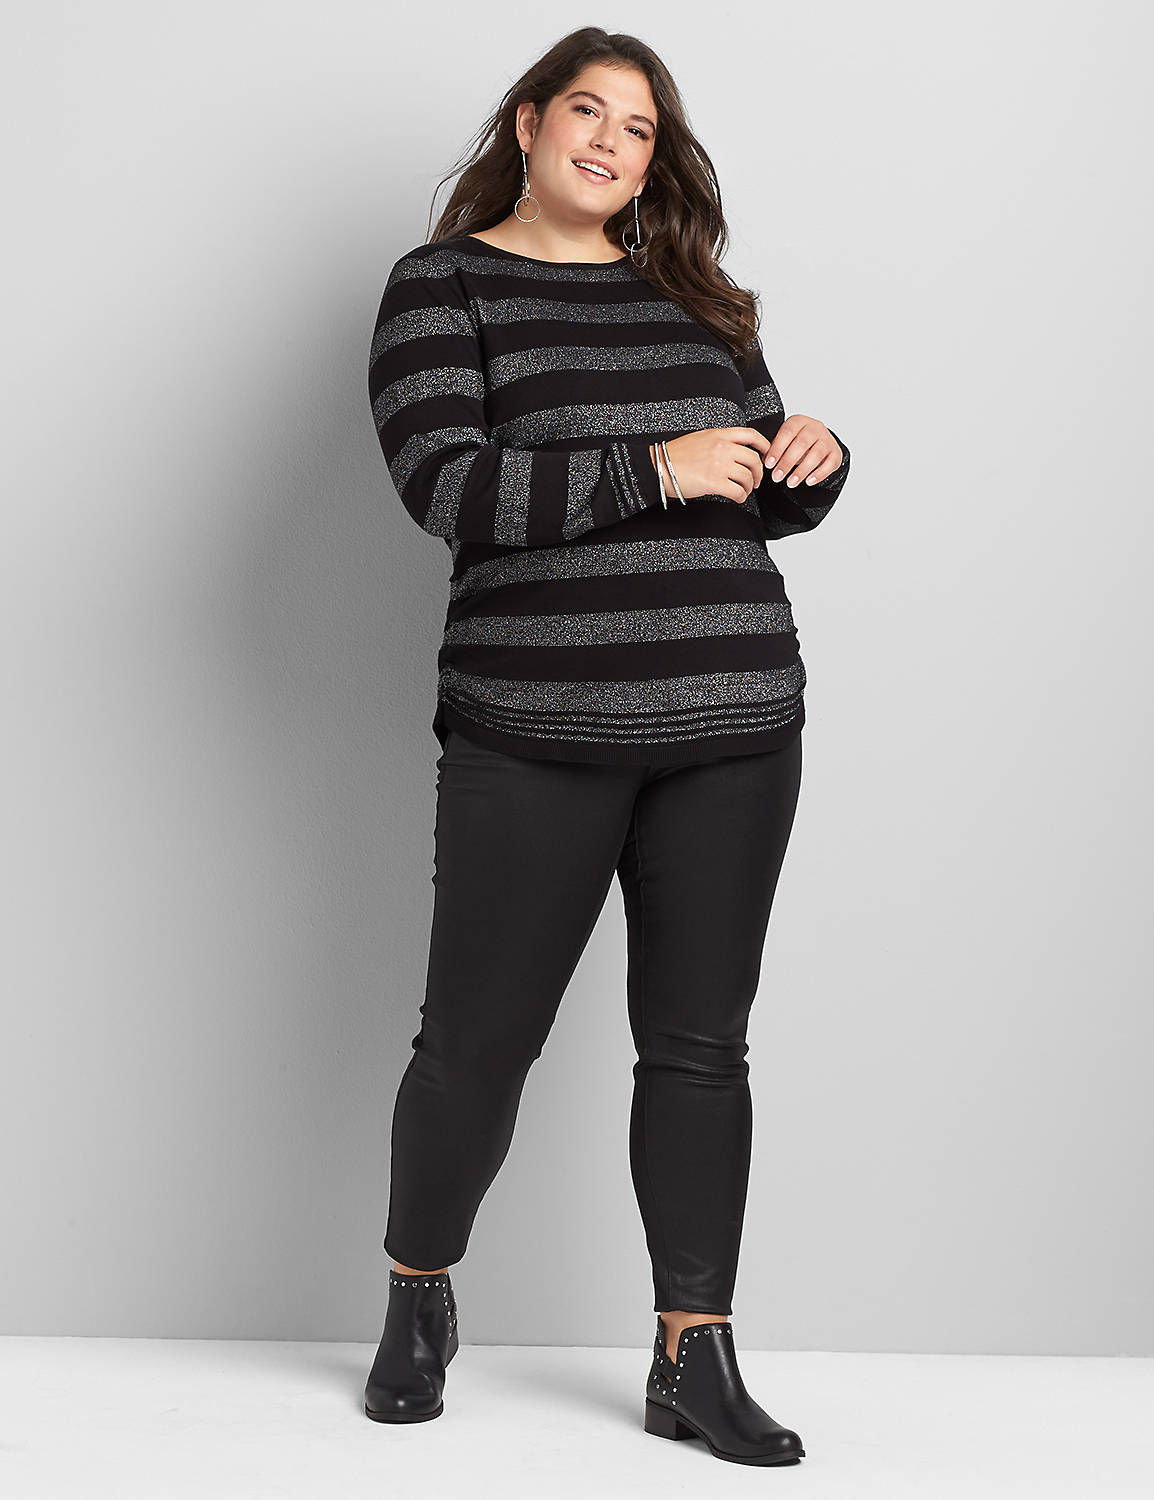 Long Sleeve Boatneck Pullover with Stripes 1118027:Pitch Black LB 1000322:22/24 Product Image 3